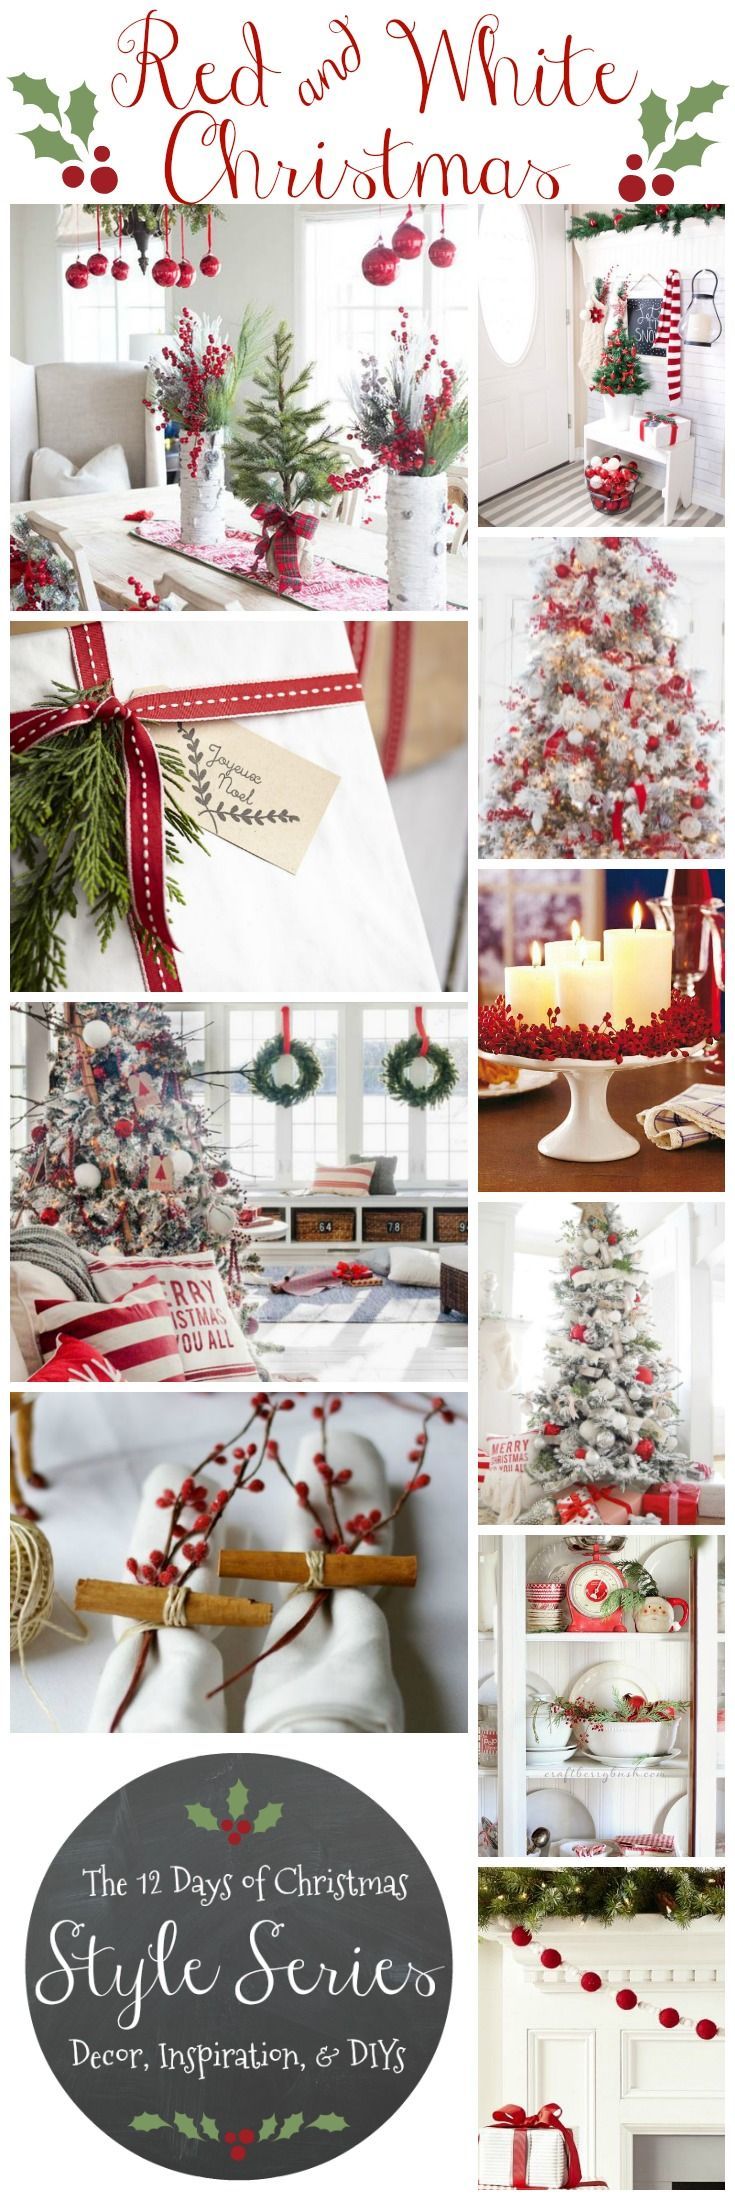 red-and-white-christmas-12-days-of-christmas-style-series-red-and-white-decor-inspiration-and-diys